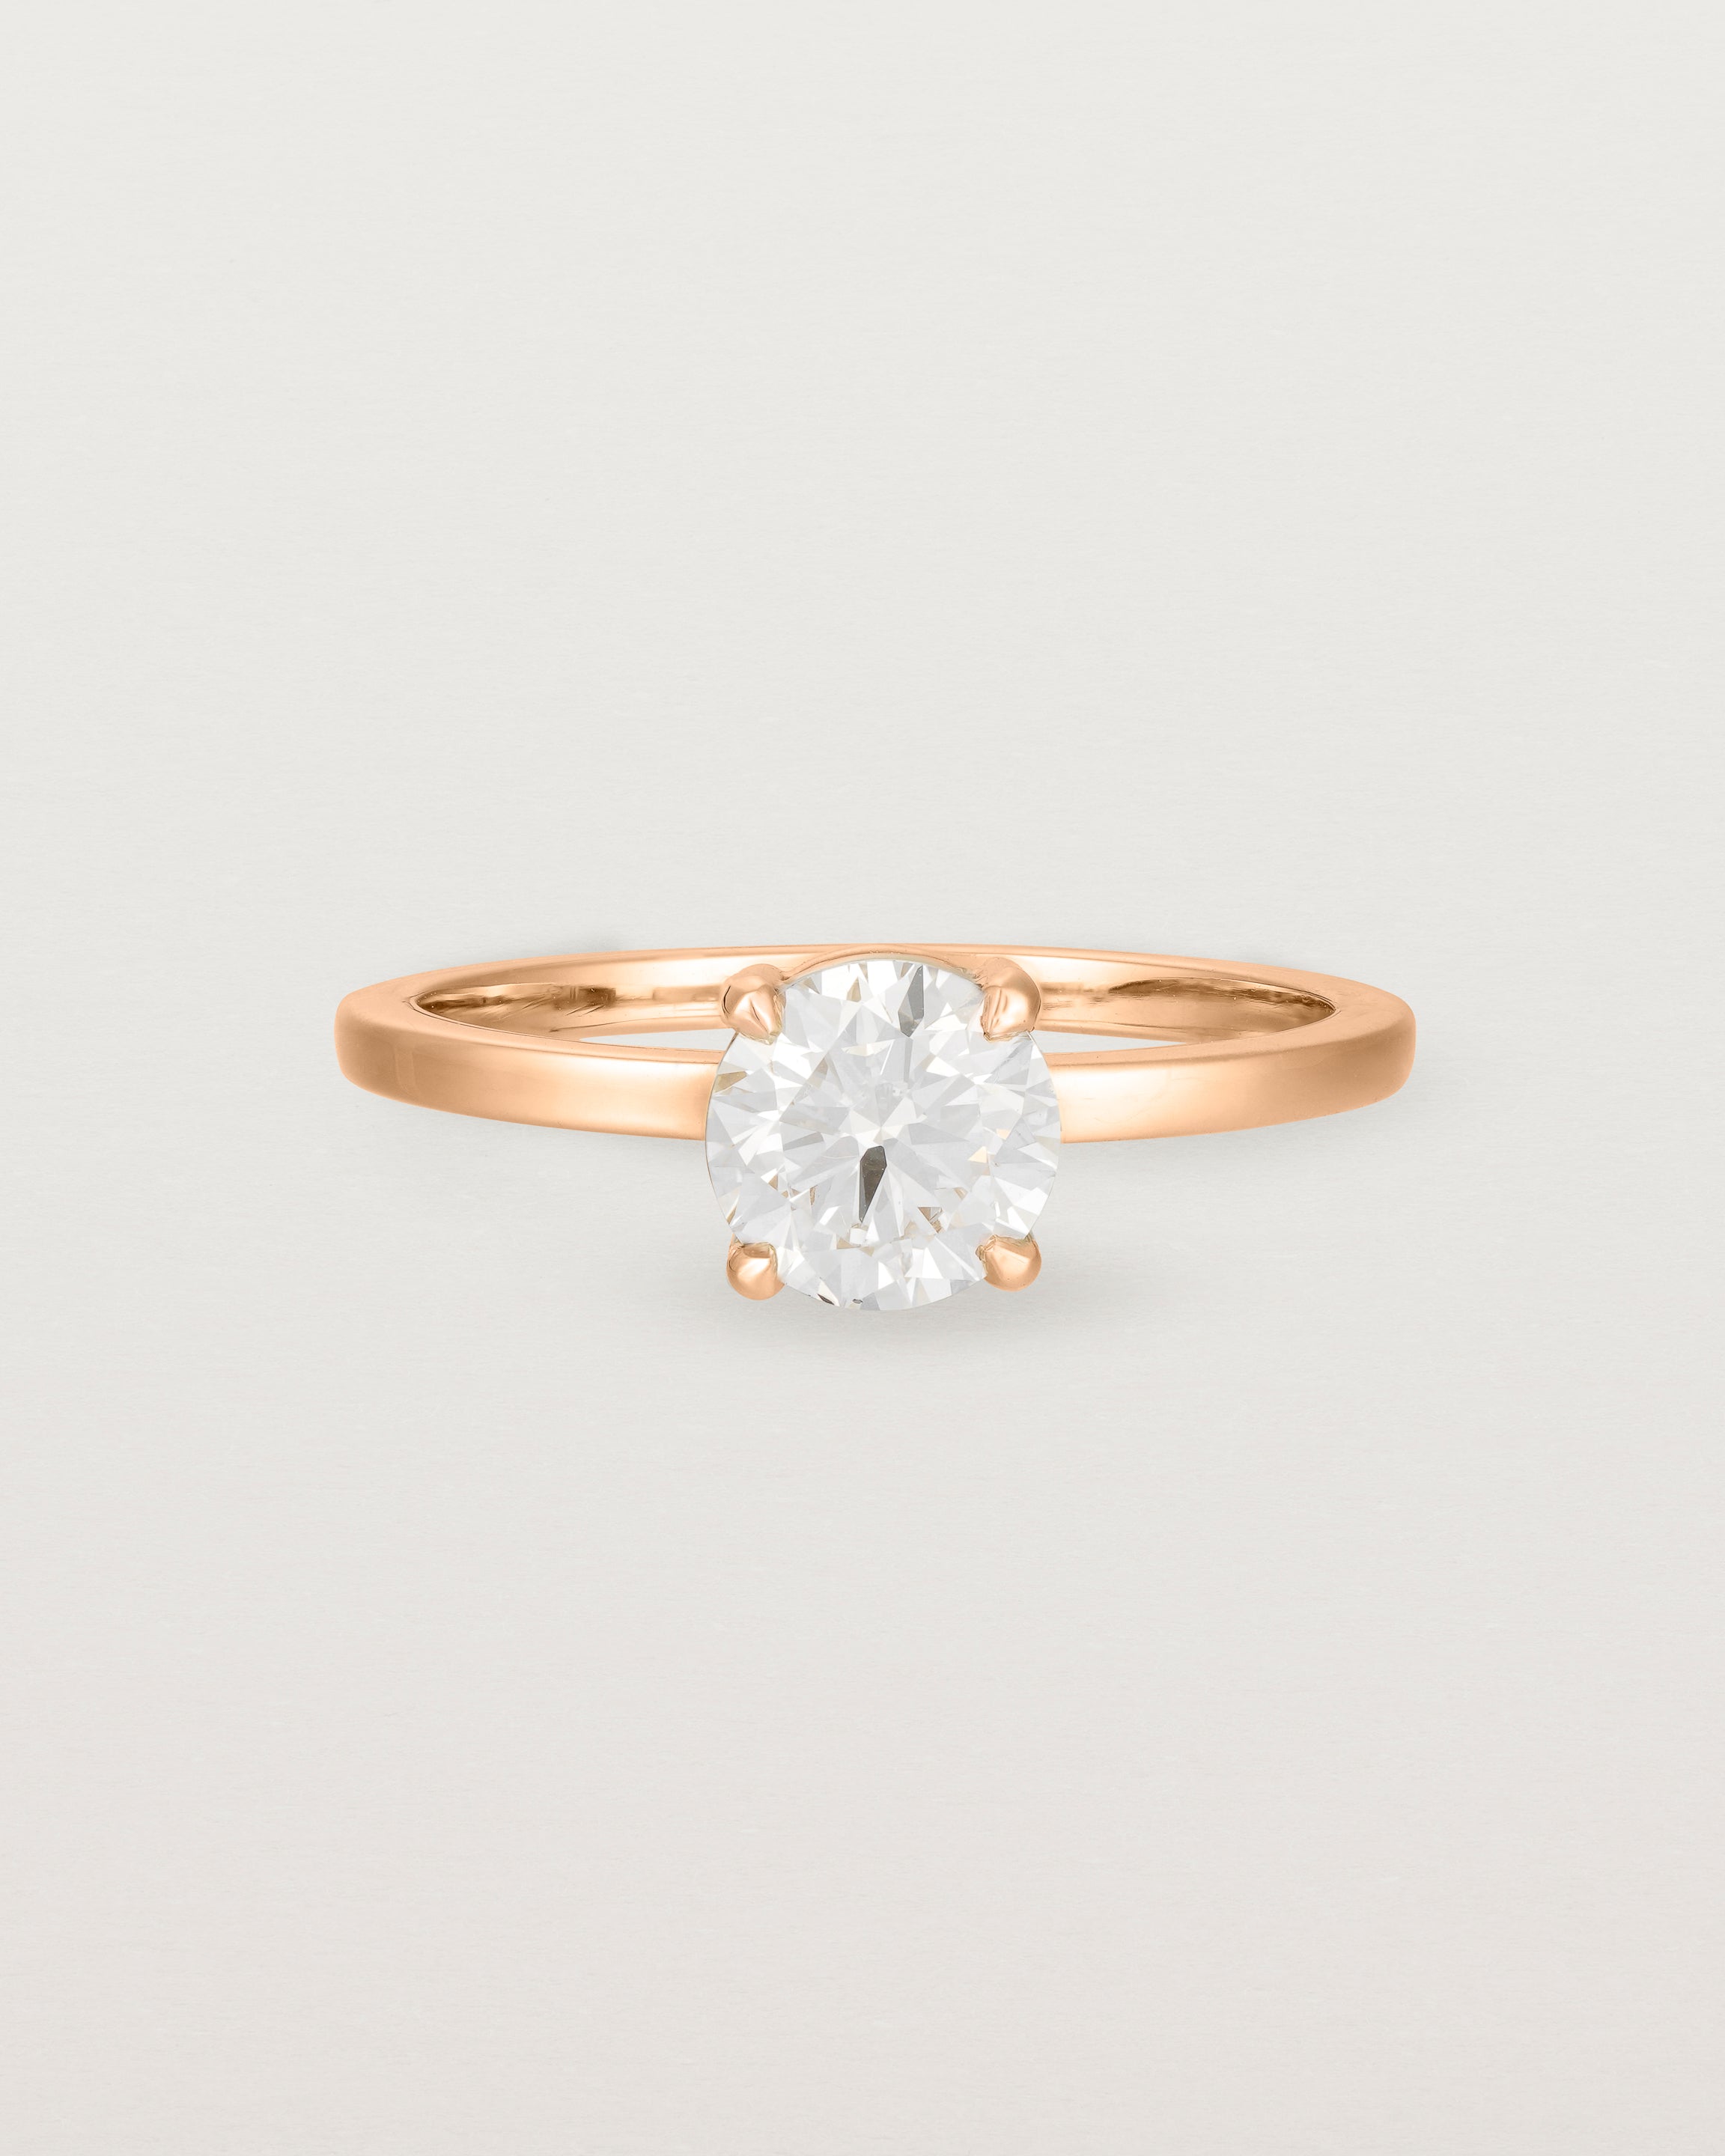 Front view of the Petite Una Round Solitaire | Laboratory Grown Diamond | Rose Gold.